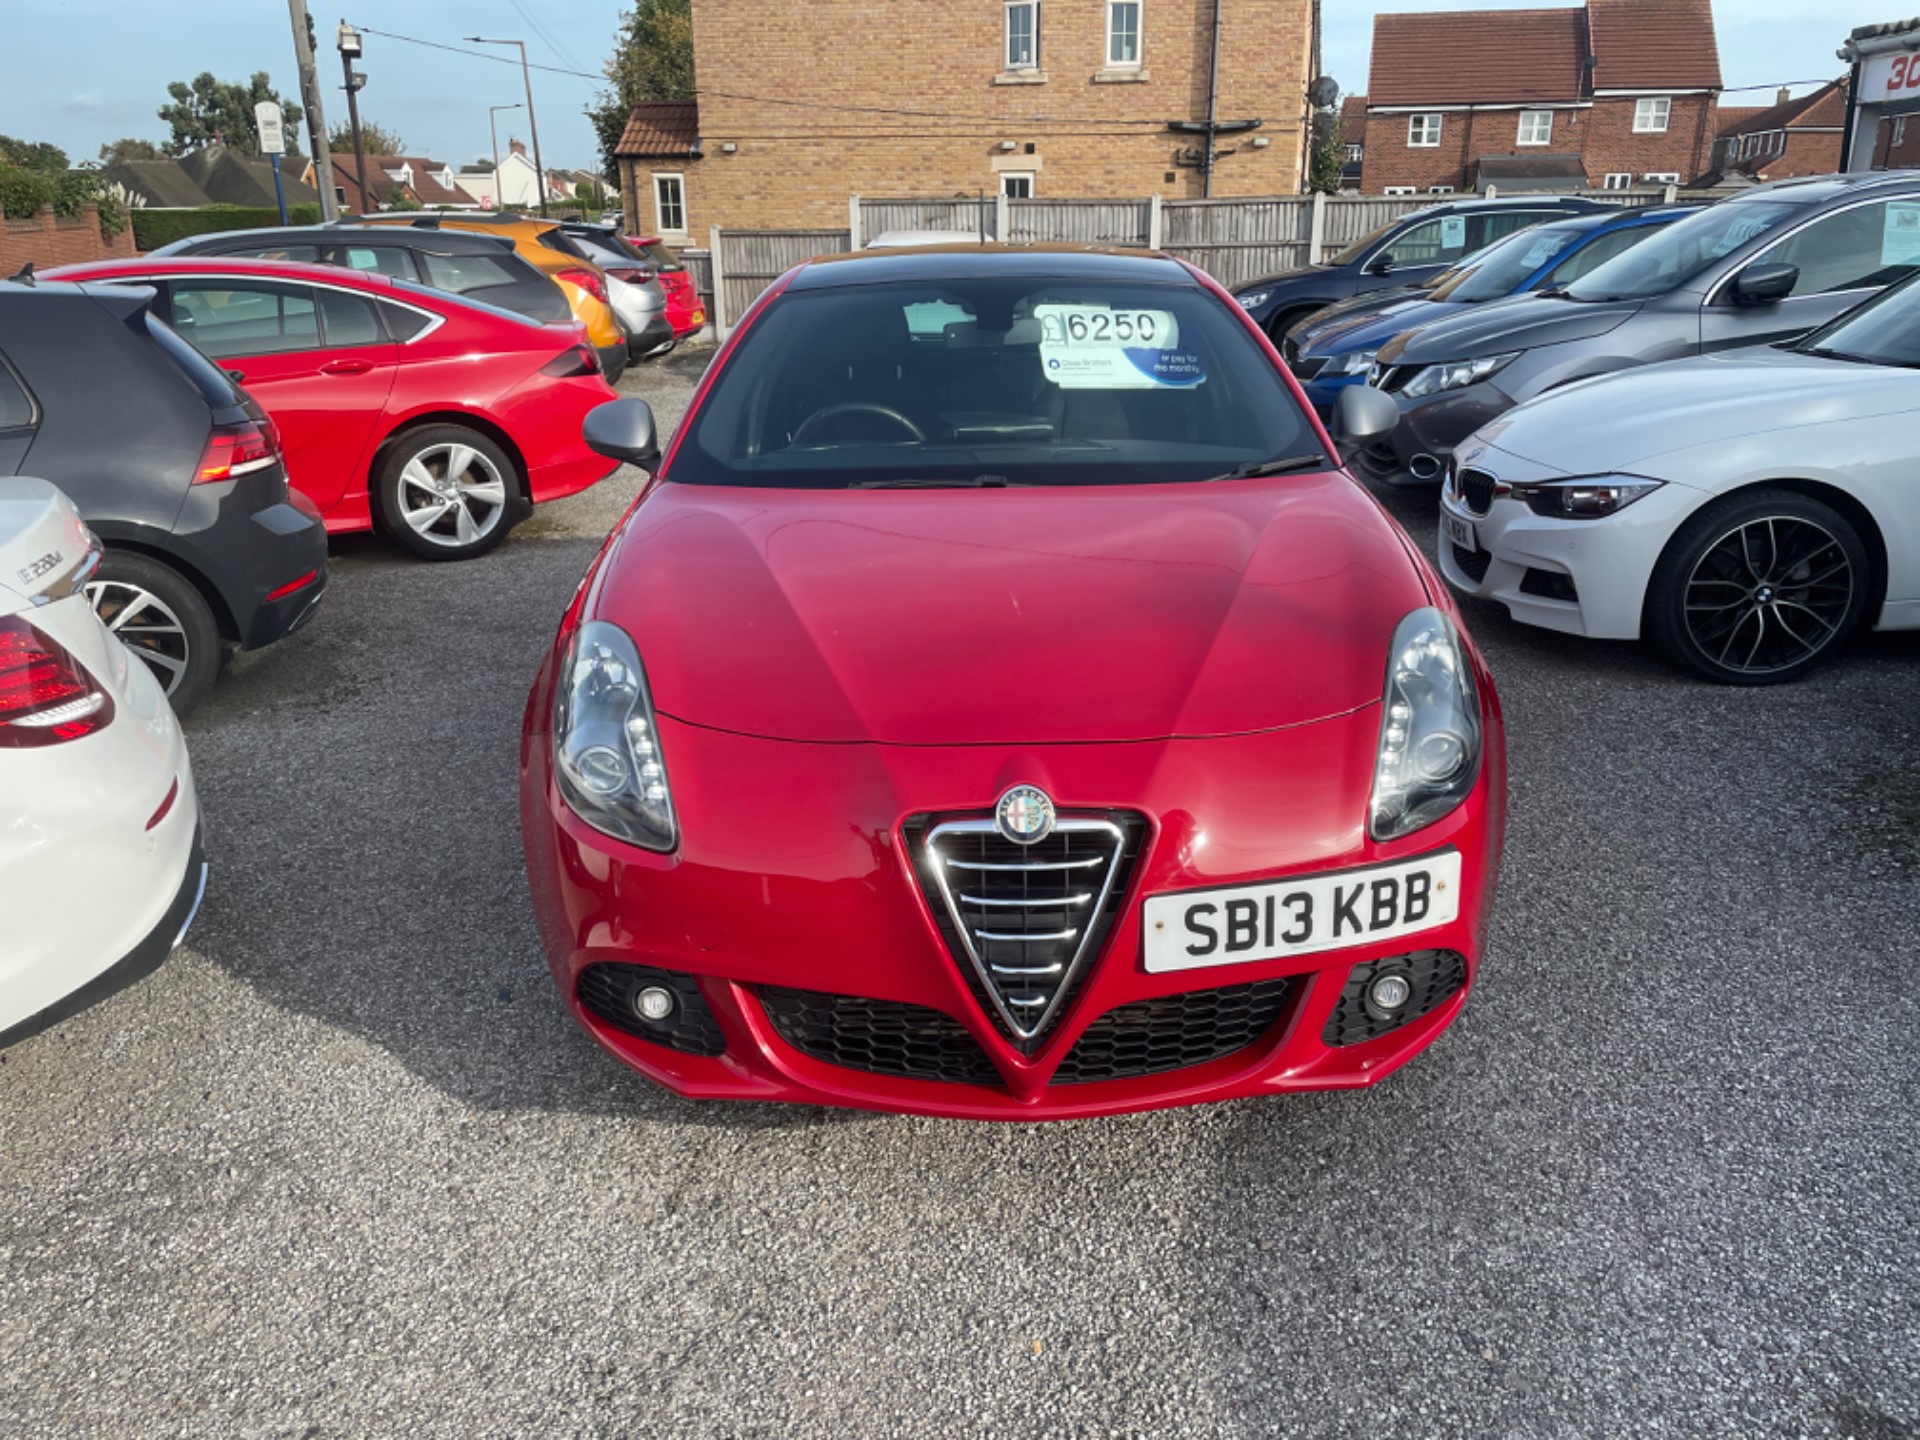 Used Alfa Romeo Giulietta for sale in Doncaster, South Yorkshire